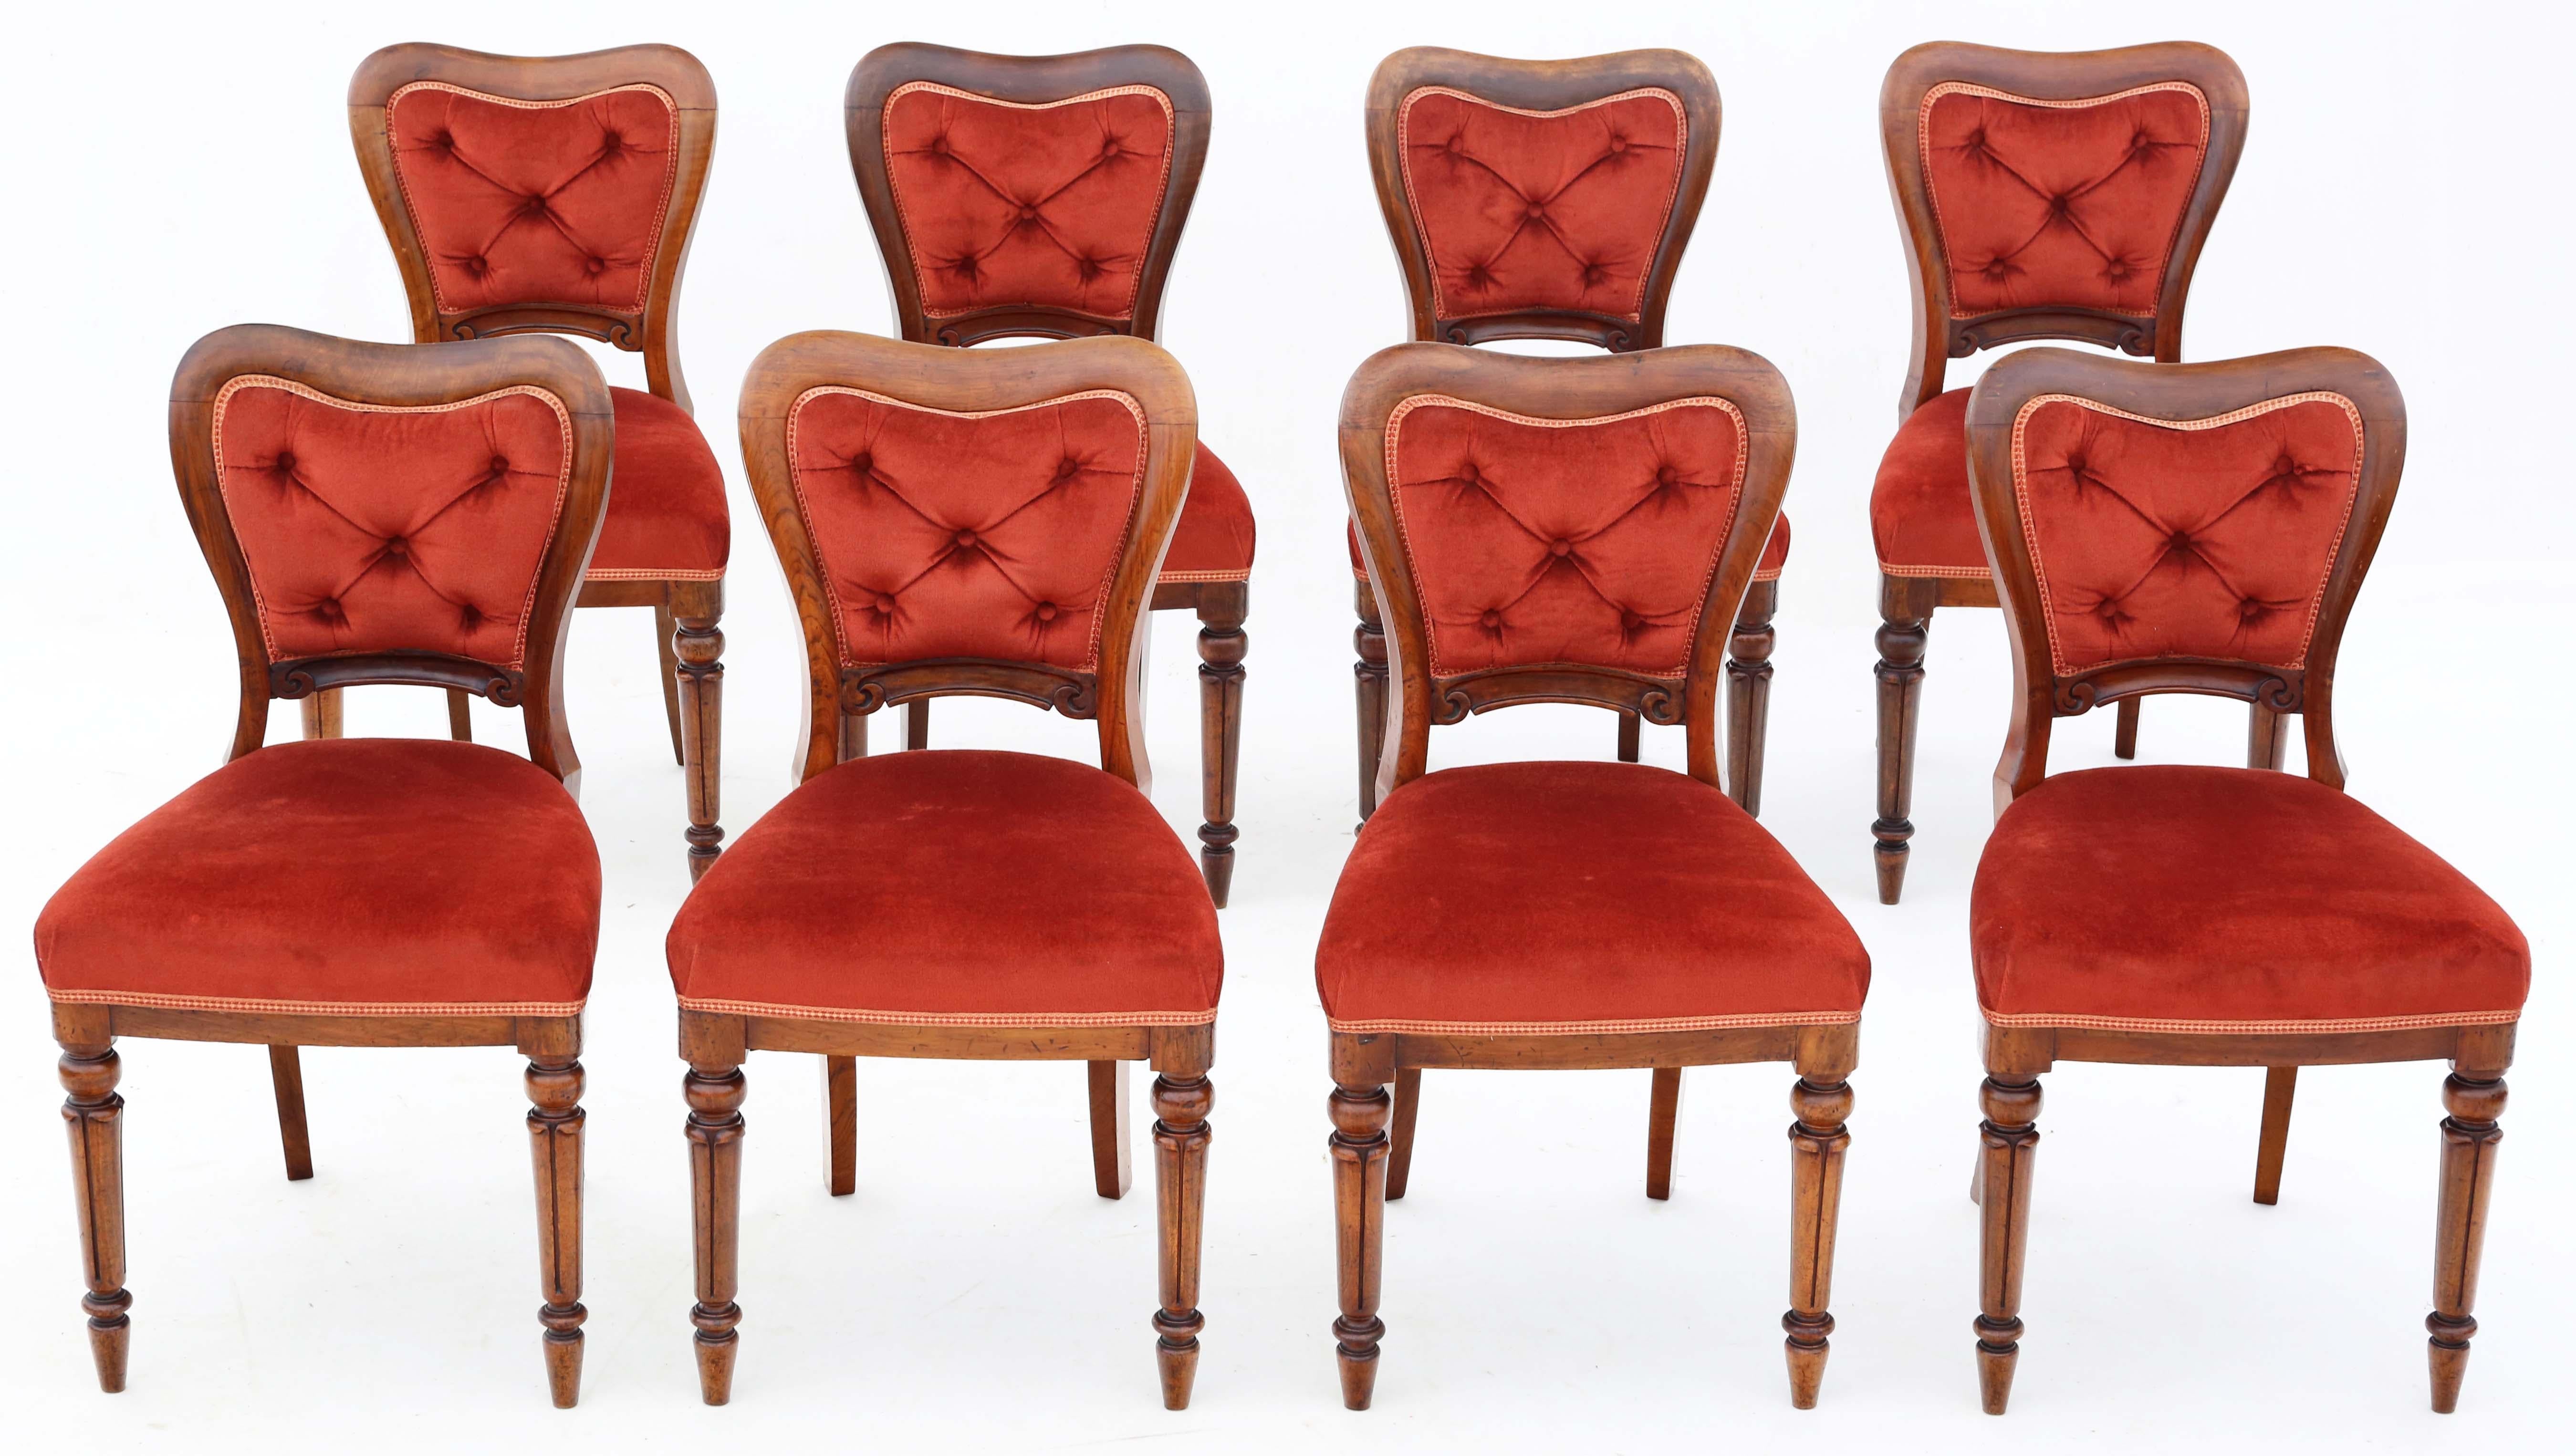 Discover the exquisite craftsmanship of this rare set of 8 Victorian walnut dining chairs from the 19th Century, boasting desirable padded backs for added comfort. These chairs are a testament to timeless elegance, featuring solid construction with